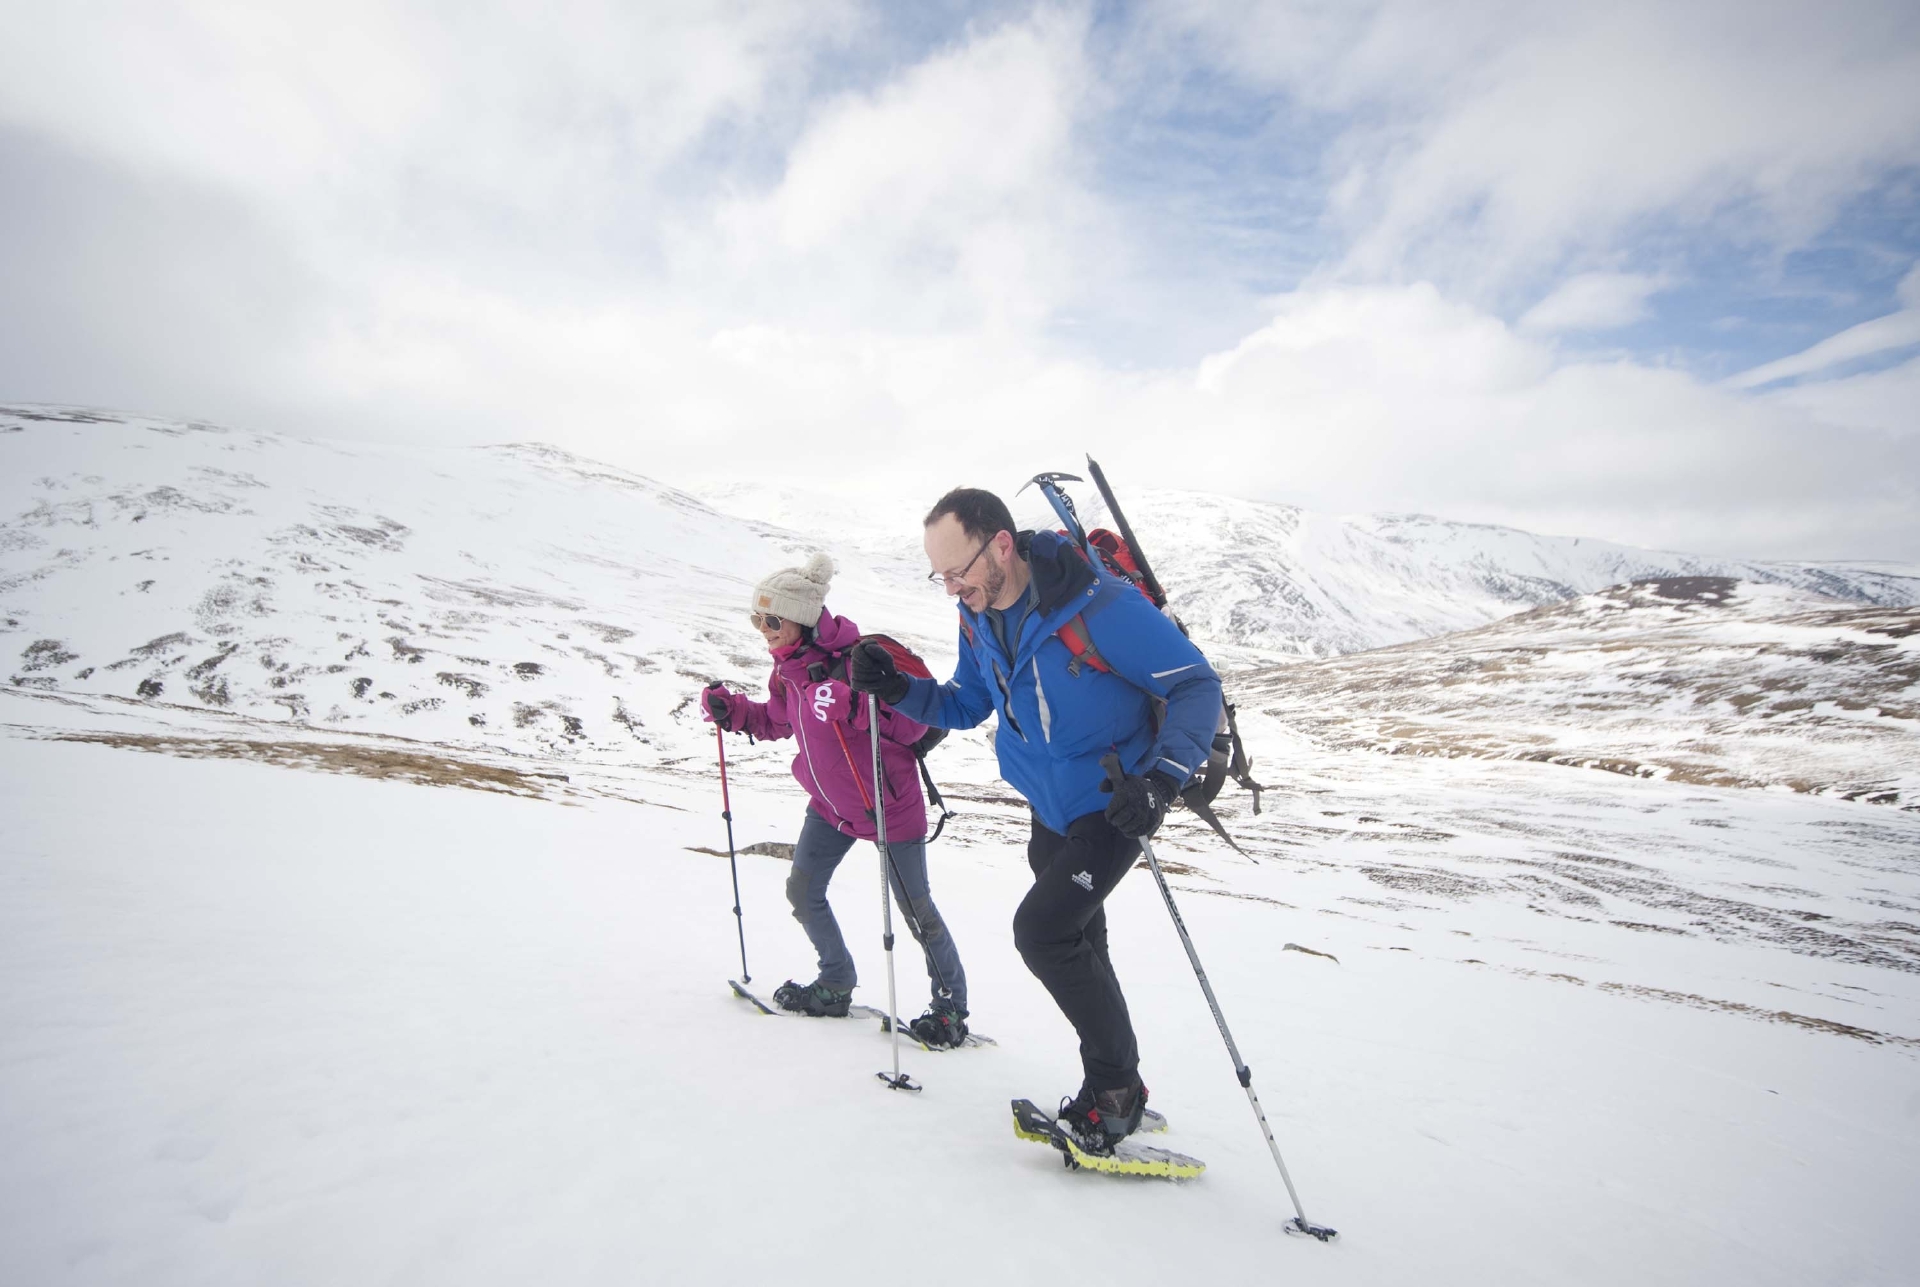 Gayle Ritchie and Paul Fettes snowshoeing on Carn an Tuirc.